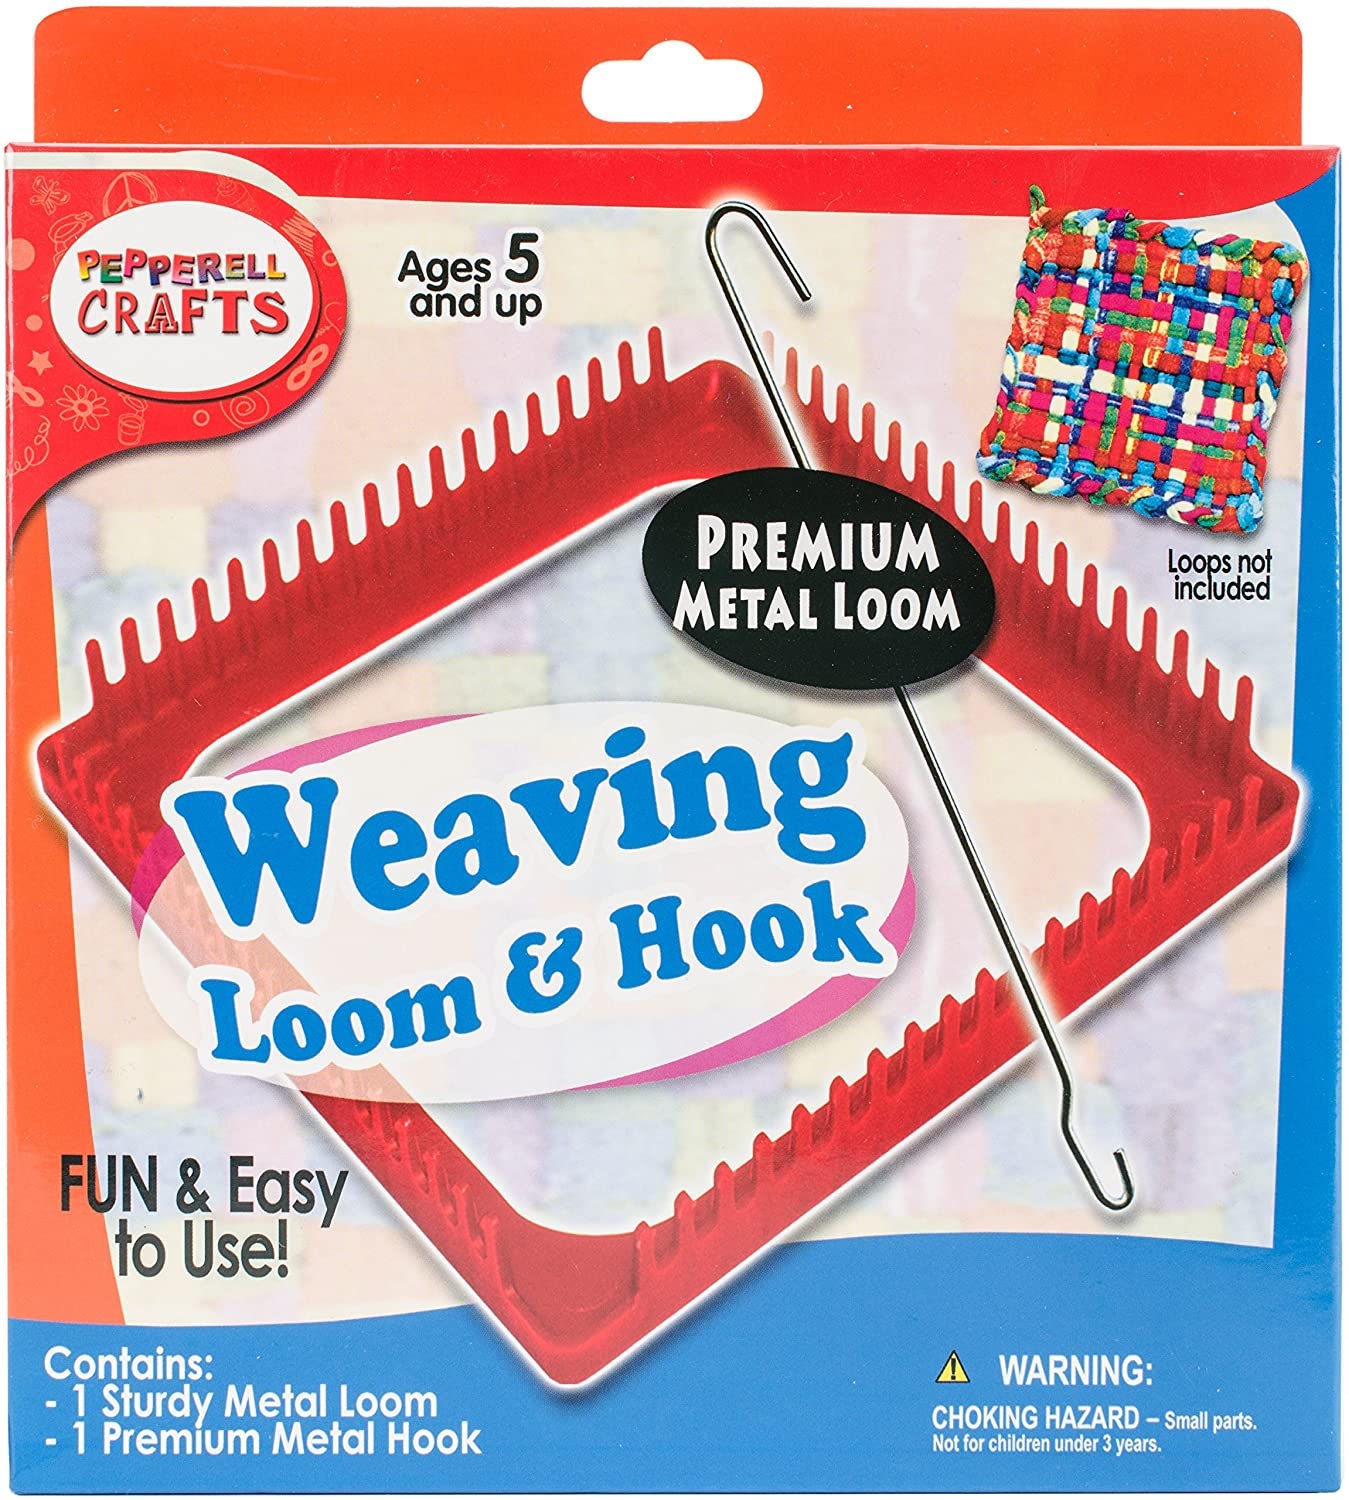 Potholder Looms, Wood, 4 Sizes, Safe, Sturdy, Beautiful. Made in USA.  Recycled. Use With Loops or Yarn. 